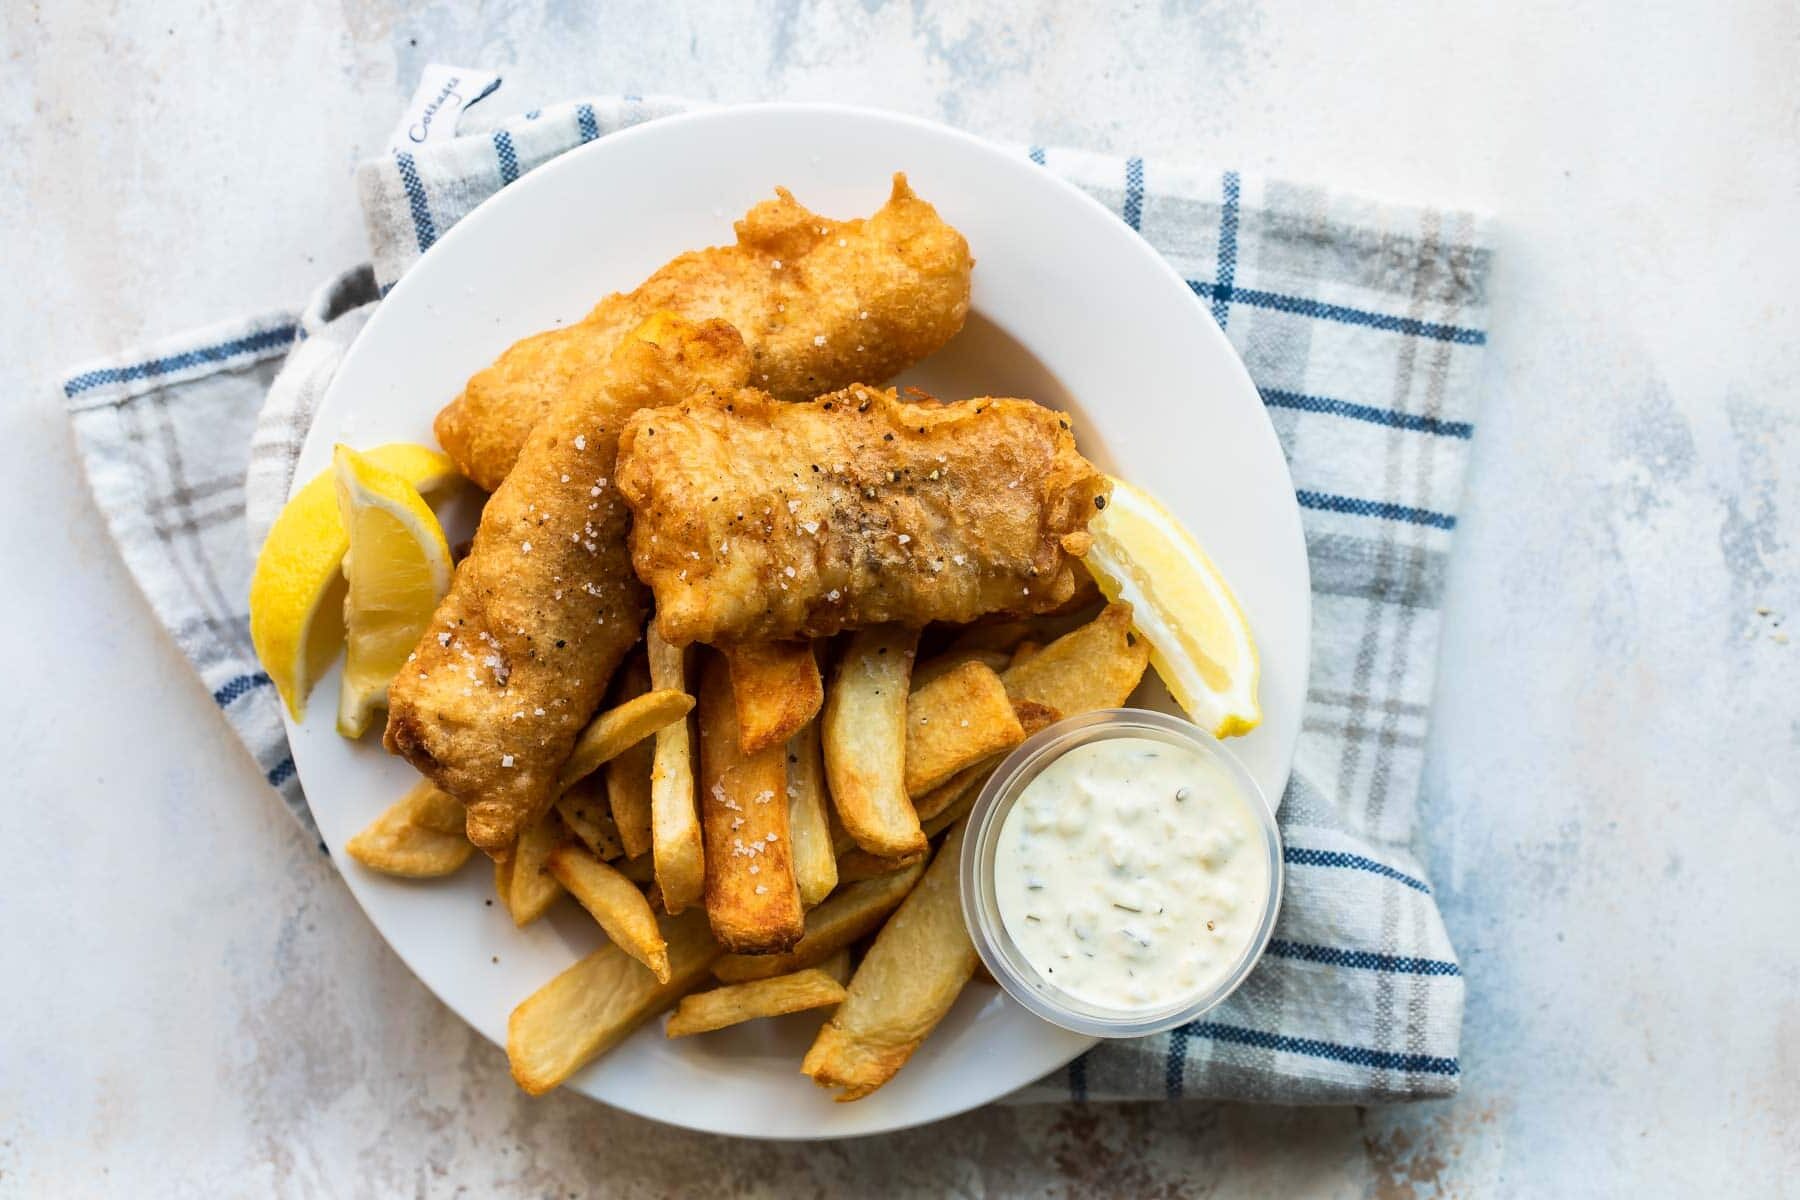 Beer battered cod, fries, tartar sauce and a lemon wedge on a plate.